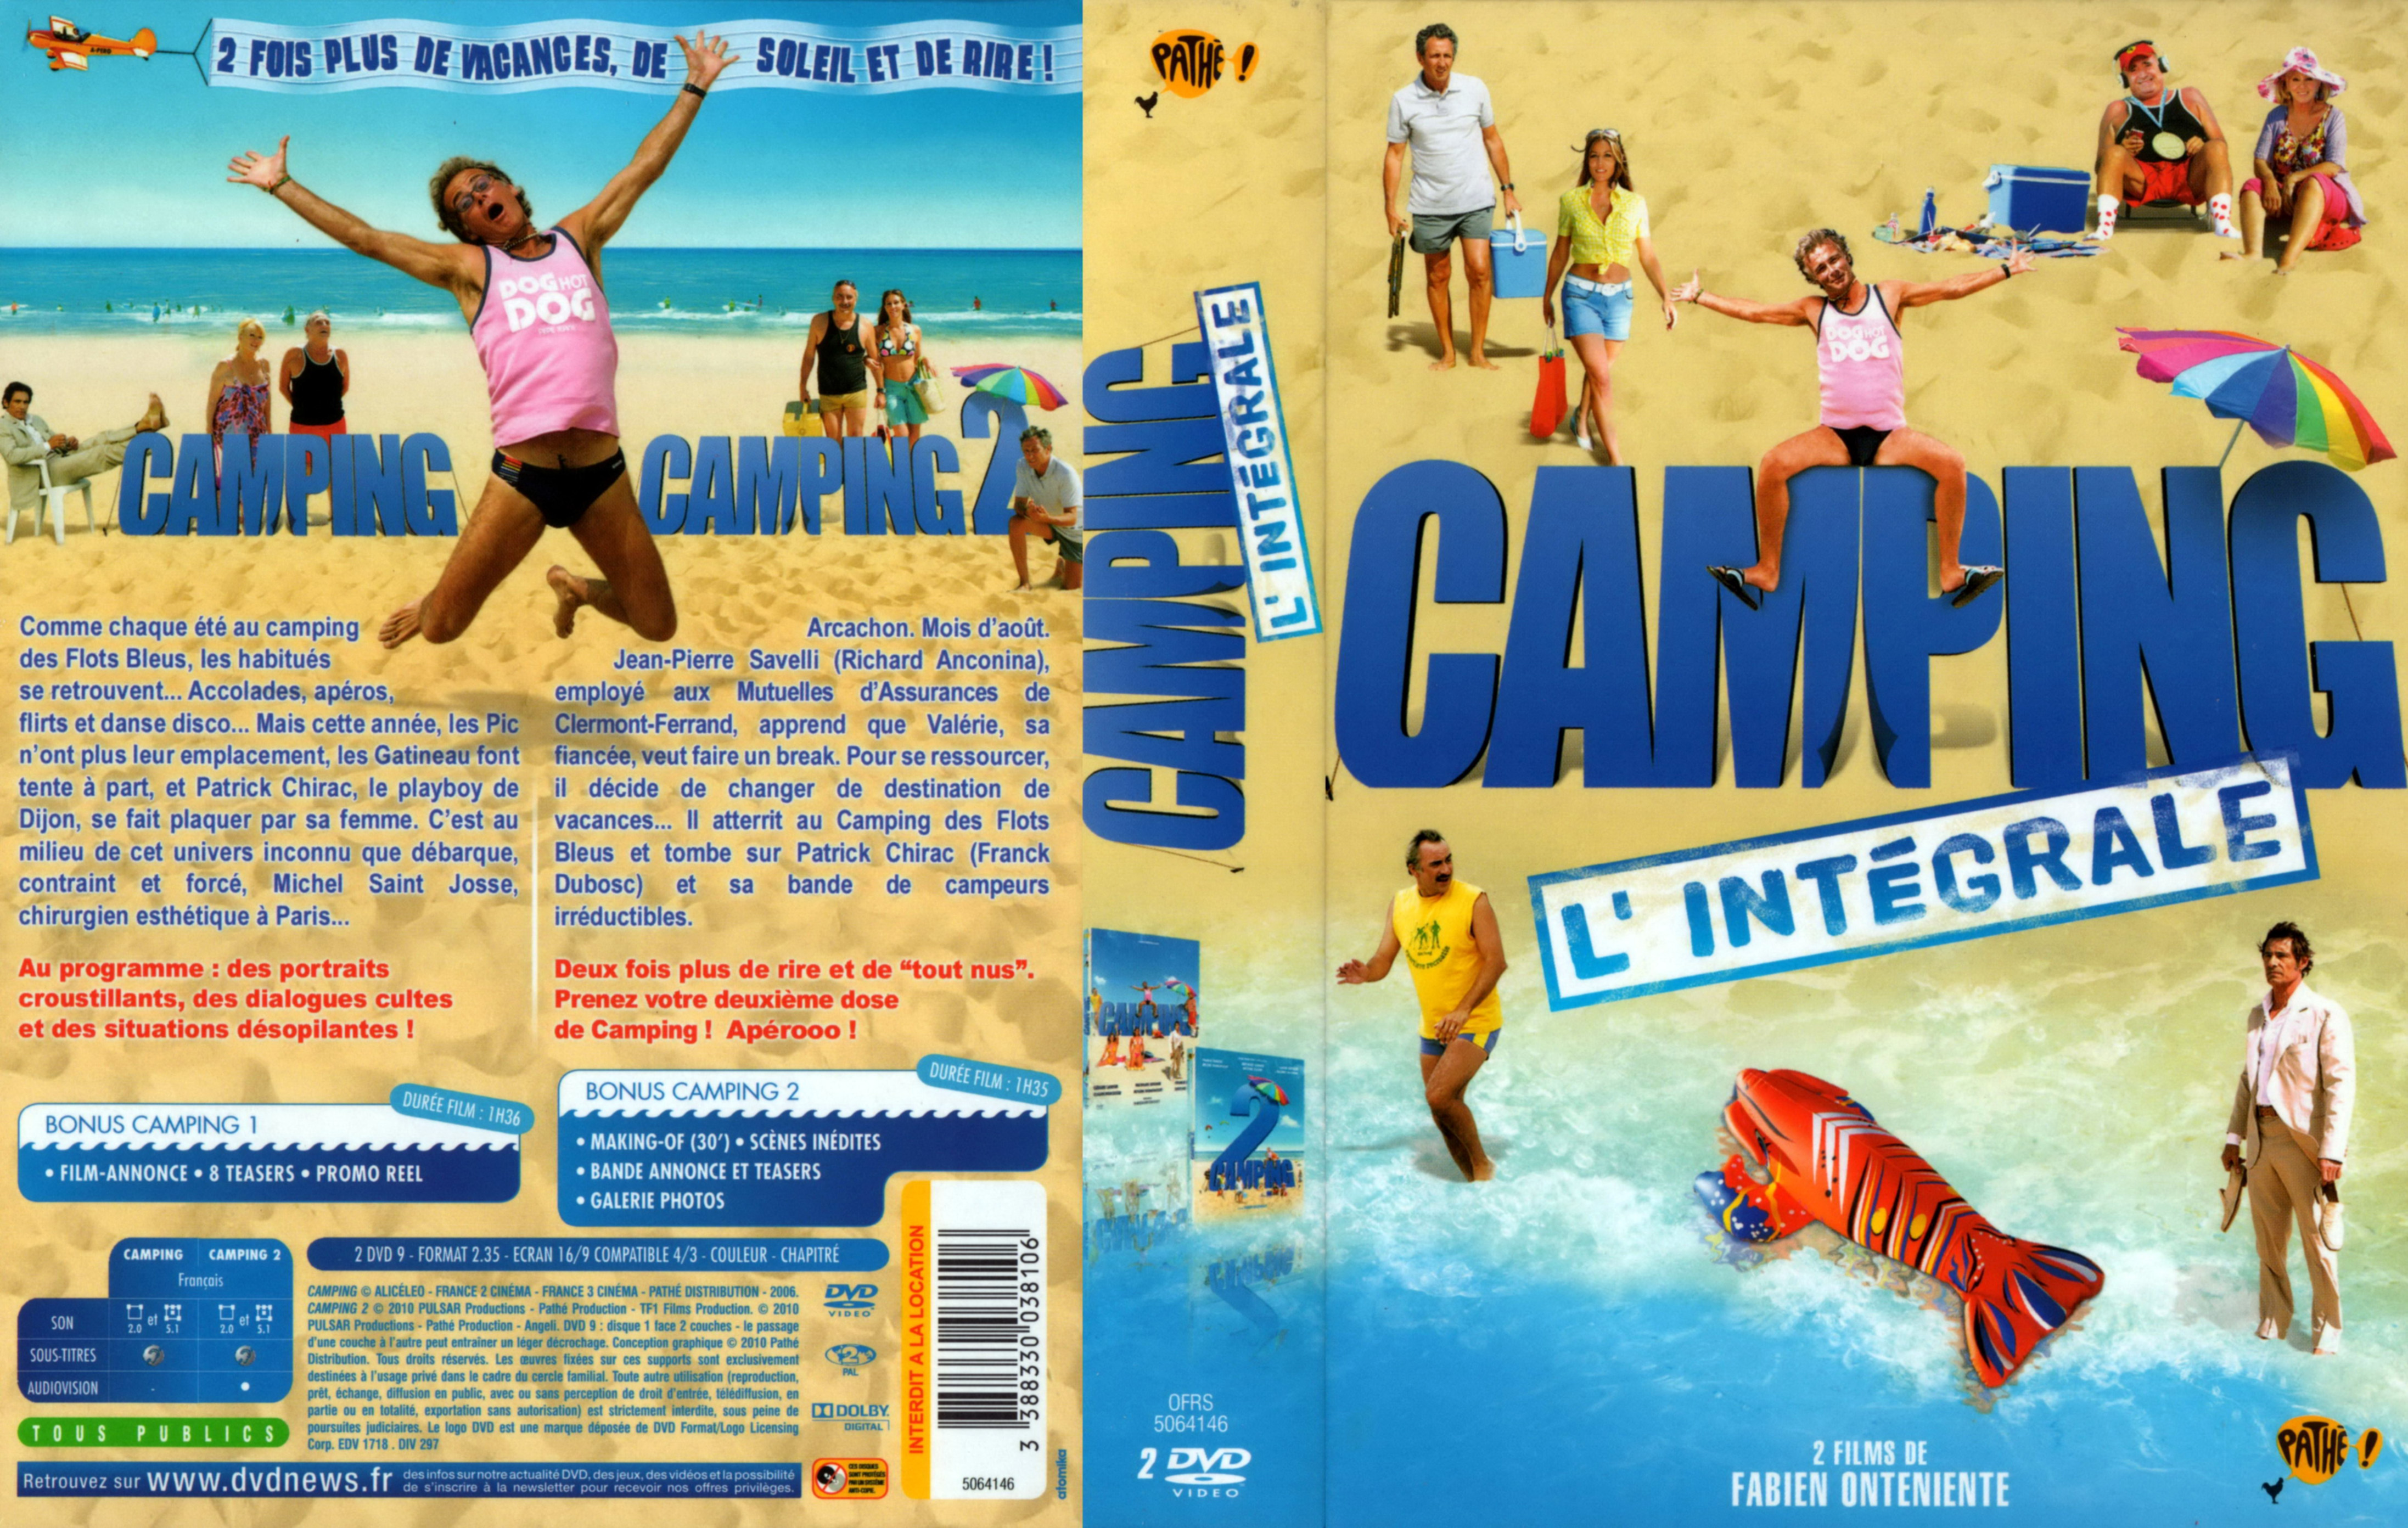 Jaquette DVD Camping Integrale